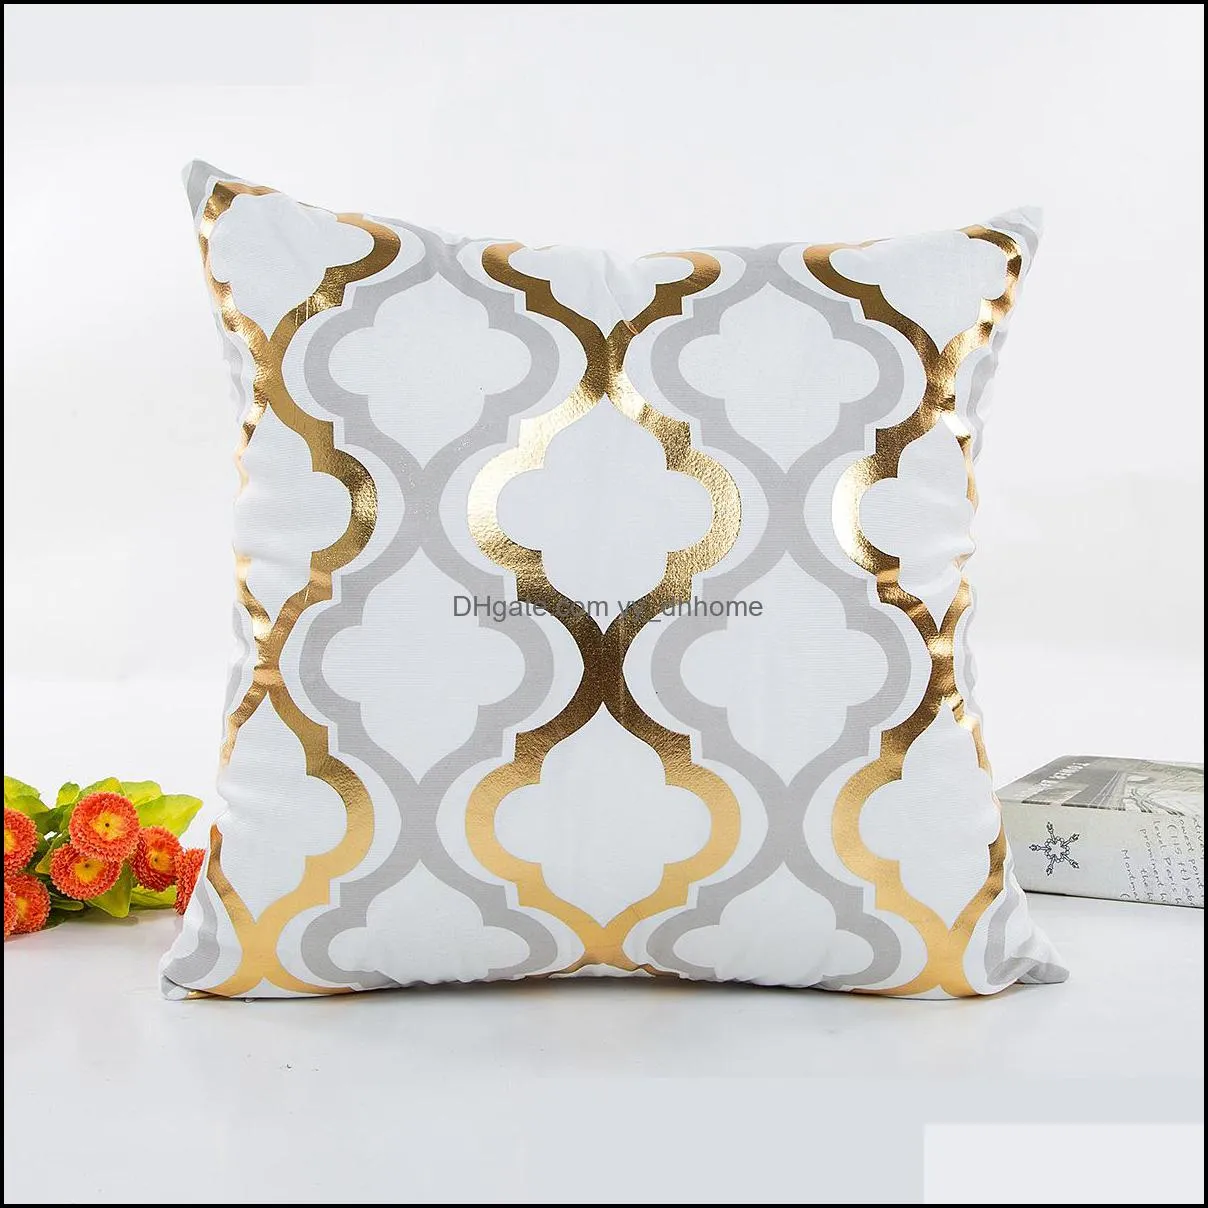 Supersoft Velvet Bronzing Pillow Cover Cushion Cover Home Decor Pillow Decorative Gold and white Color Pillow Case